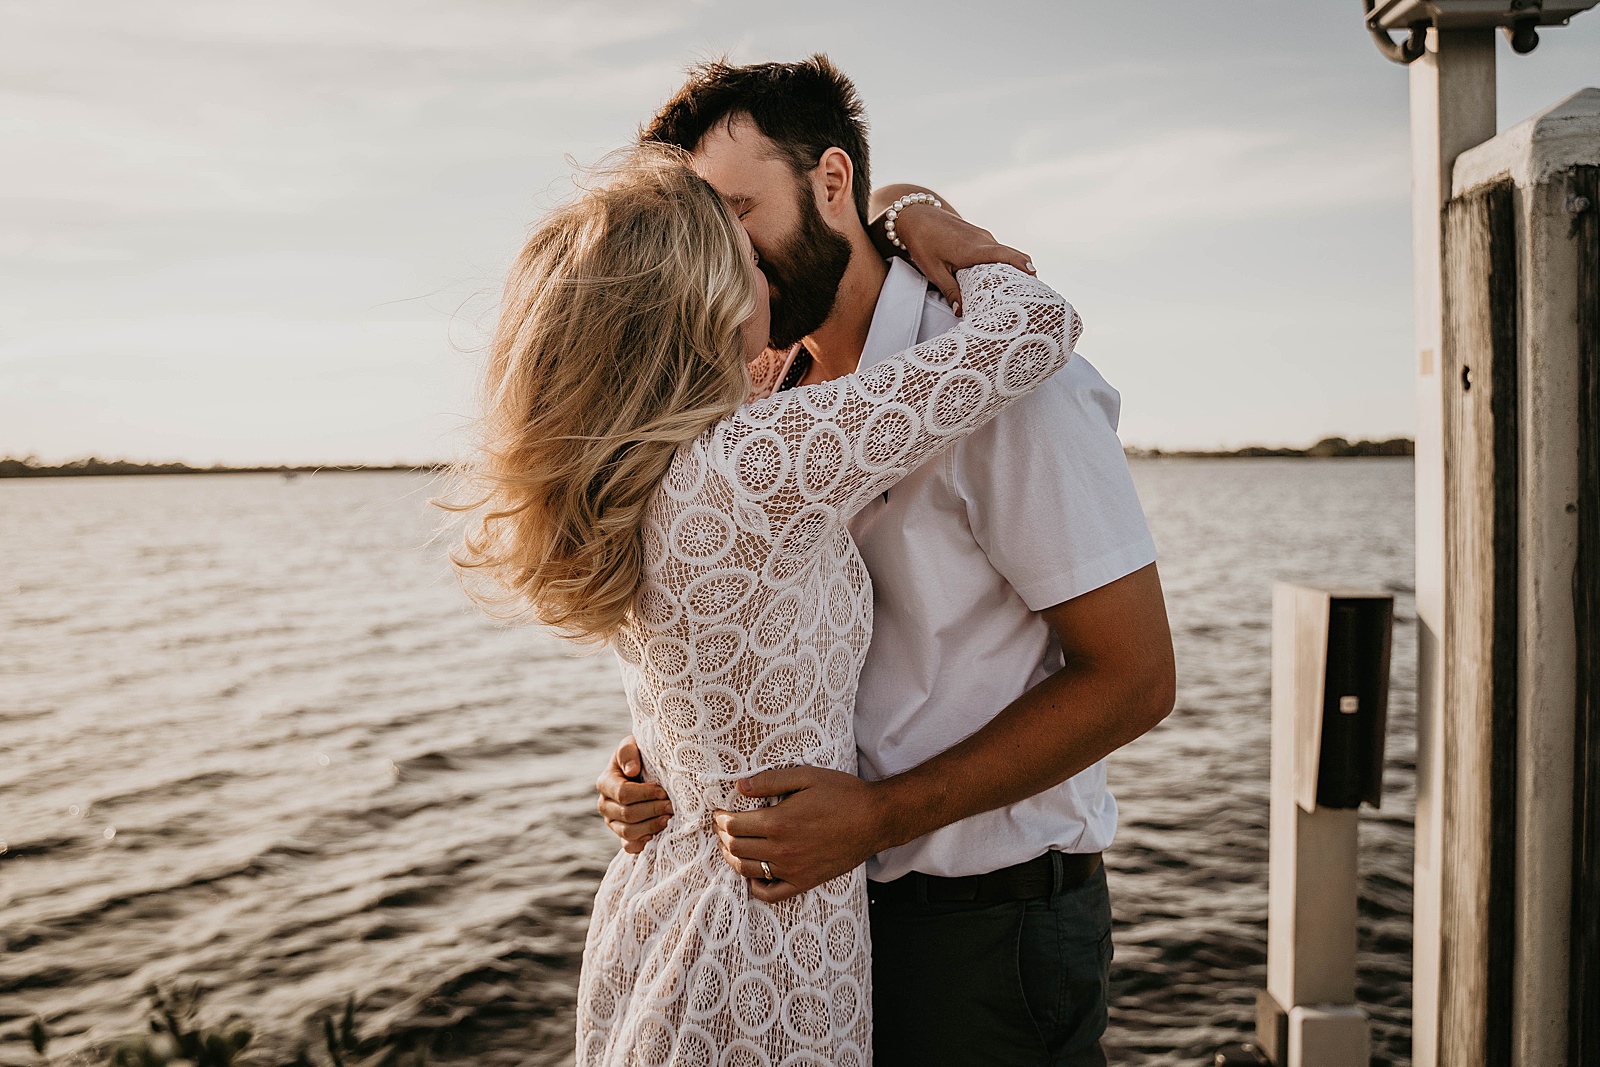 South Florida Waterfront Elopement ceremony first kiss captured by South Florida Elopement Photographer, Krystal Capone Photography